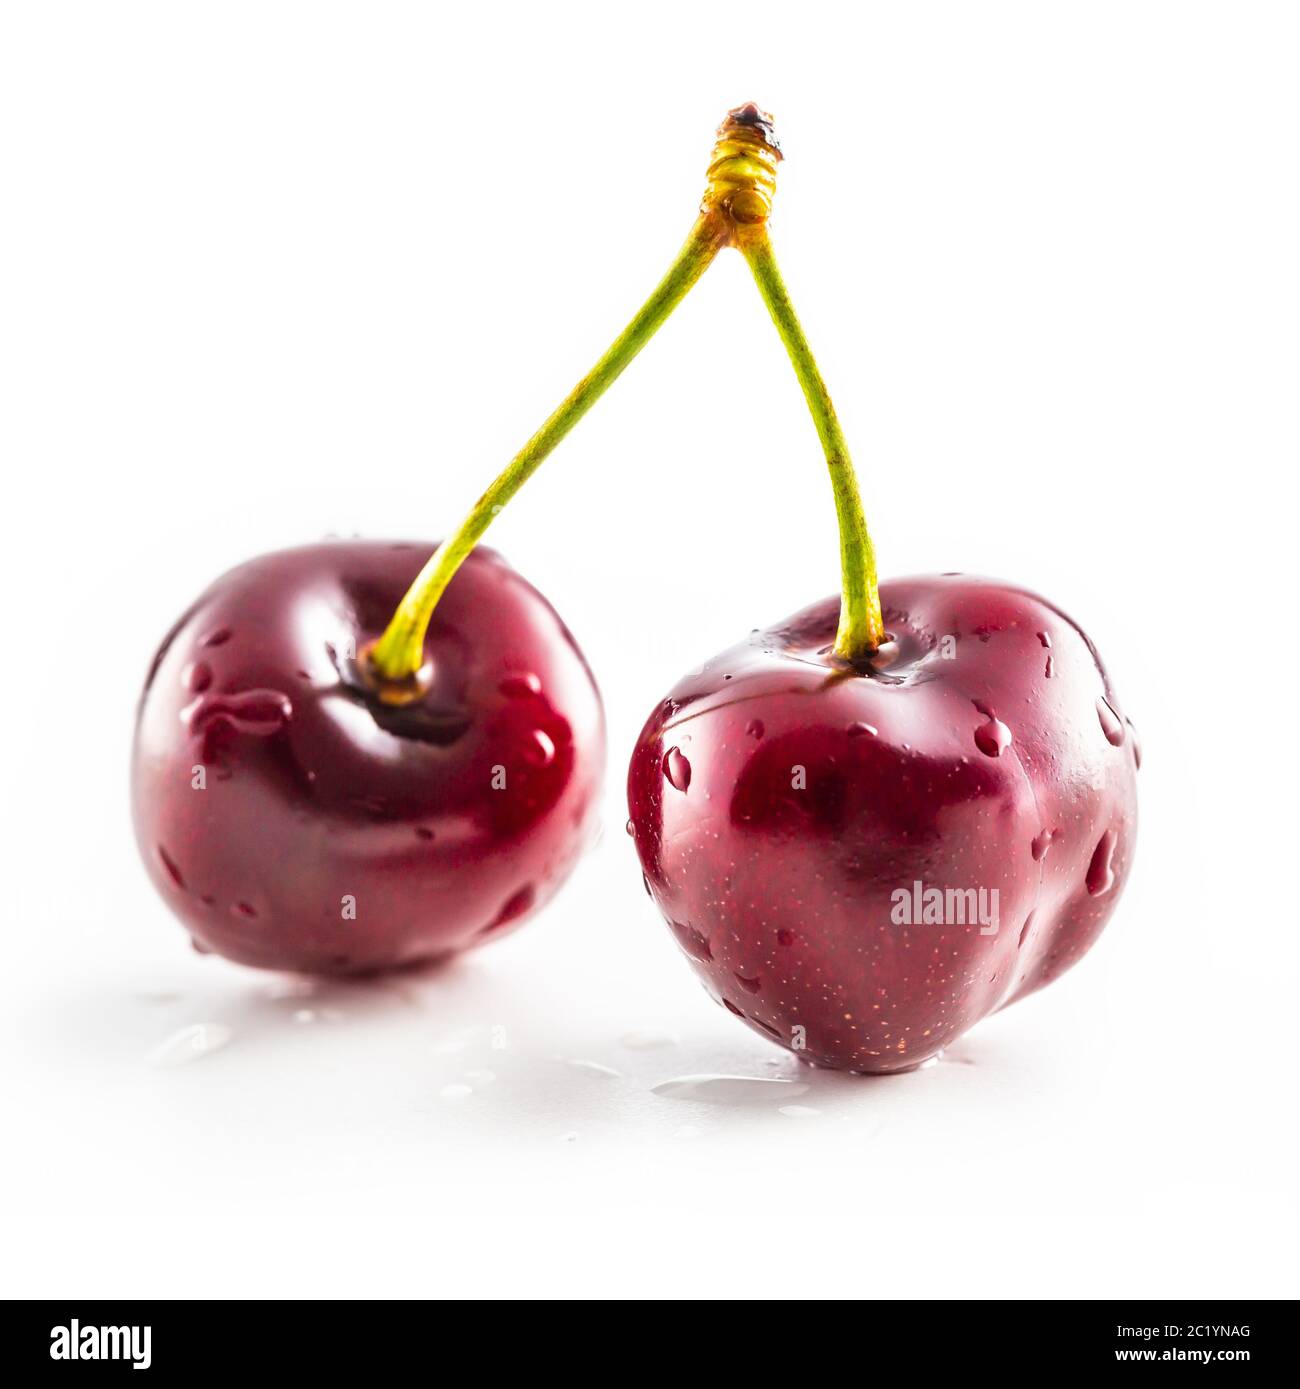 Sweet two ripe cherries isolated on white background Stock Photo